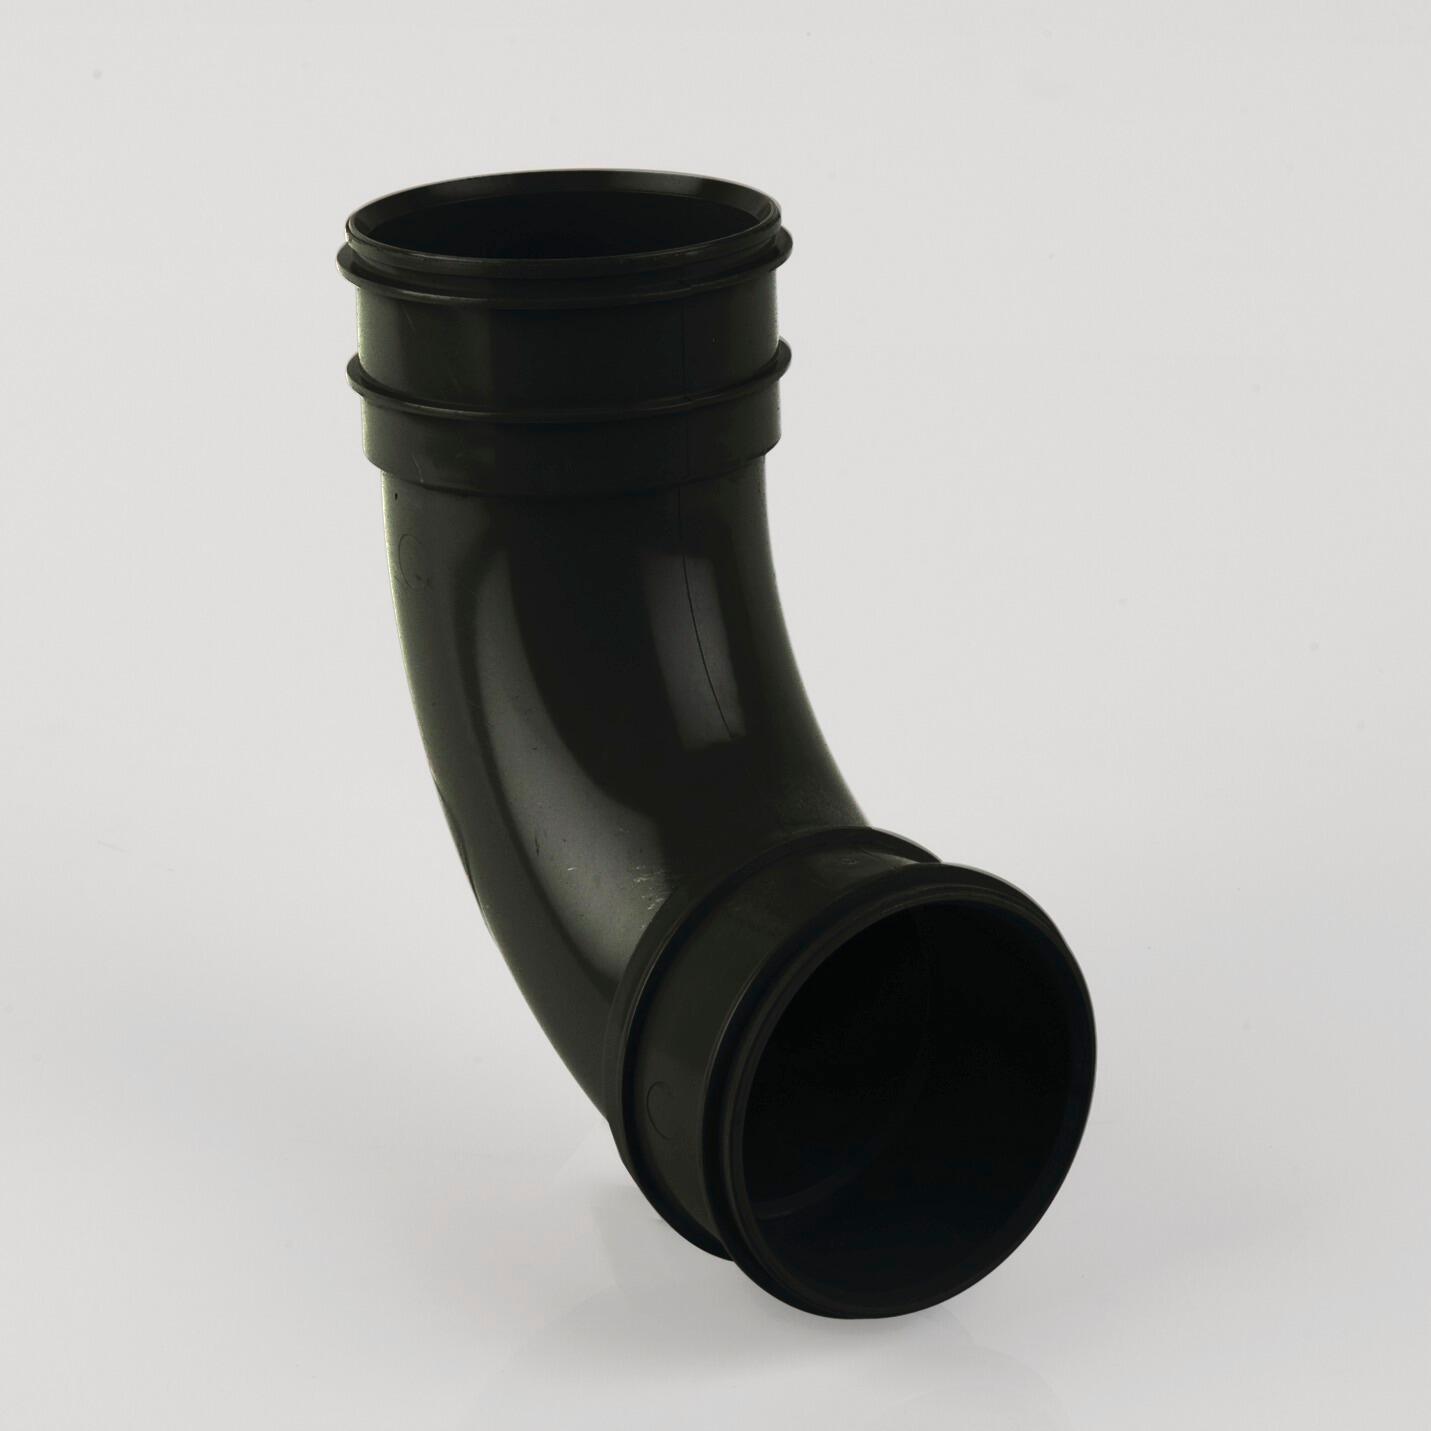 110mm PVCu Solvent Weld Soil Pipe Bend 92.5 Degrees Double Socket 473 - Plastic Drainage